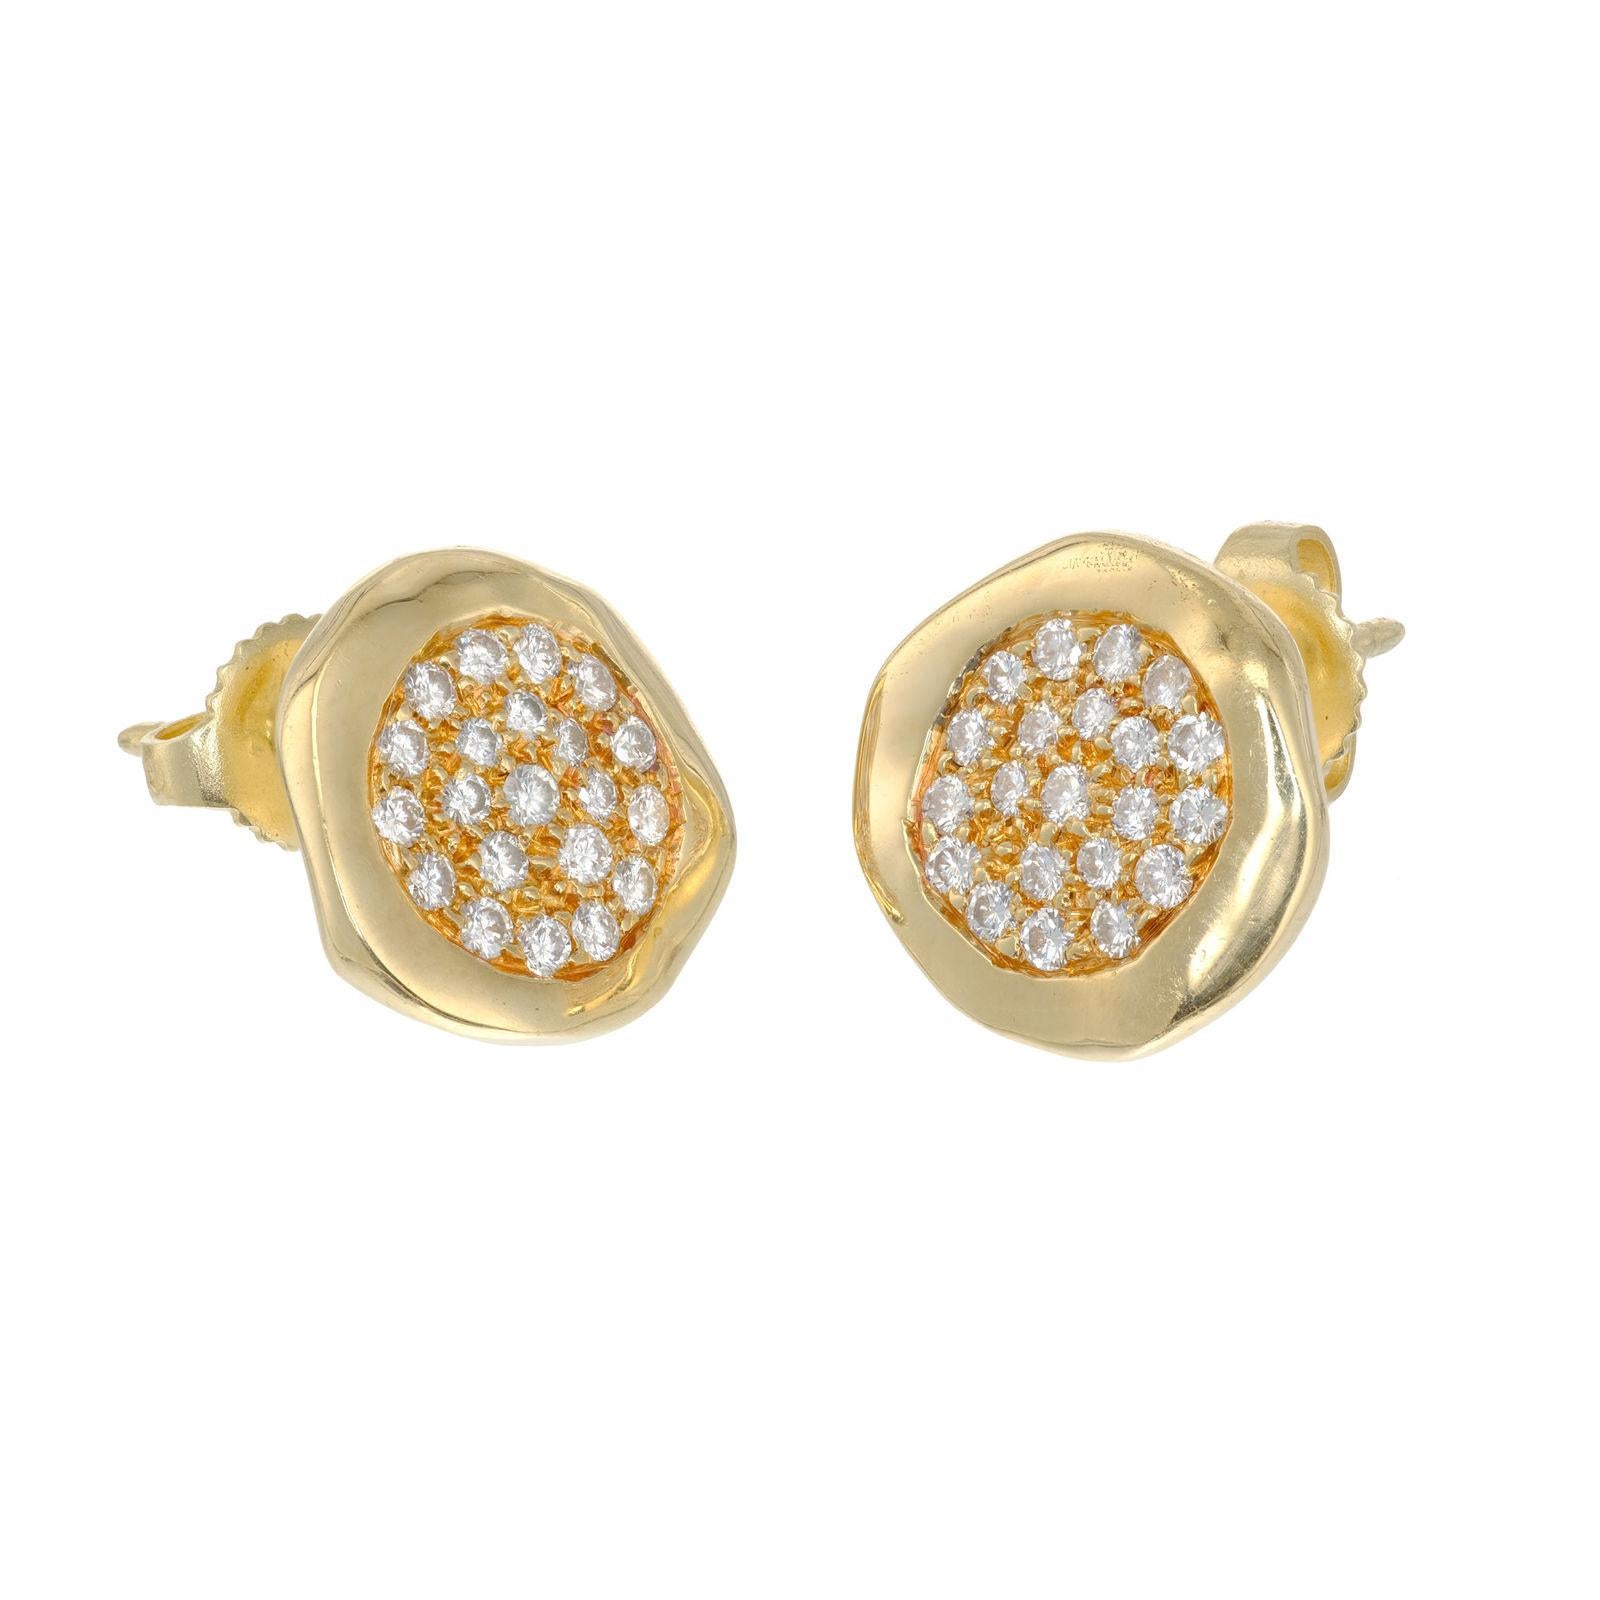 1980 Tiffany Diamond earrings, Pave set Diamonds in center of a slightly hammered edge circles of 18K yellow gold.

42 Round Brilliant Cut Diamonds, Approximate 0.50ct Total, G-H Color, VS Clarity.
18k Yellow Gold
Stamped: 18K
Tested: 18K
Hallmark: